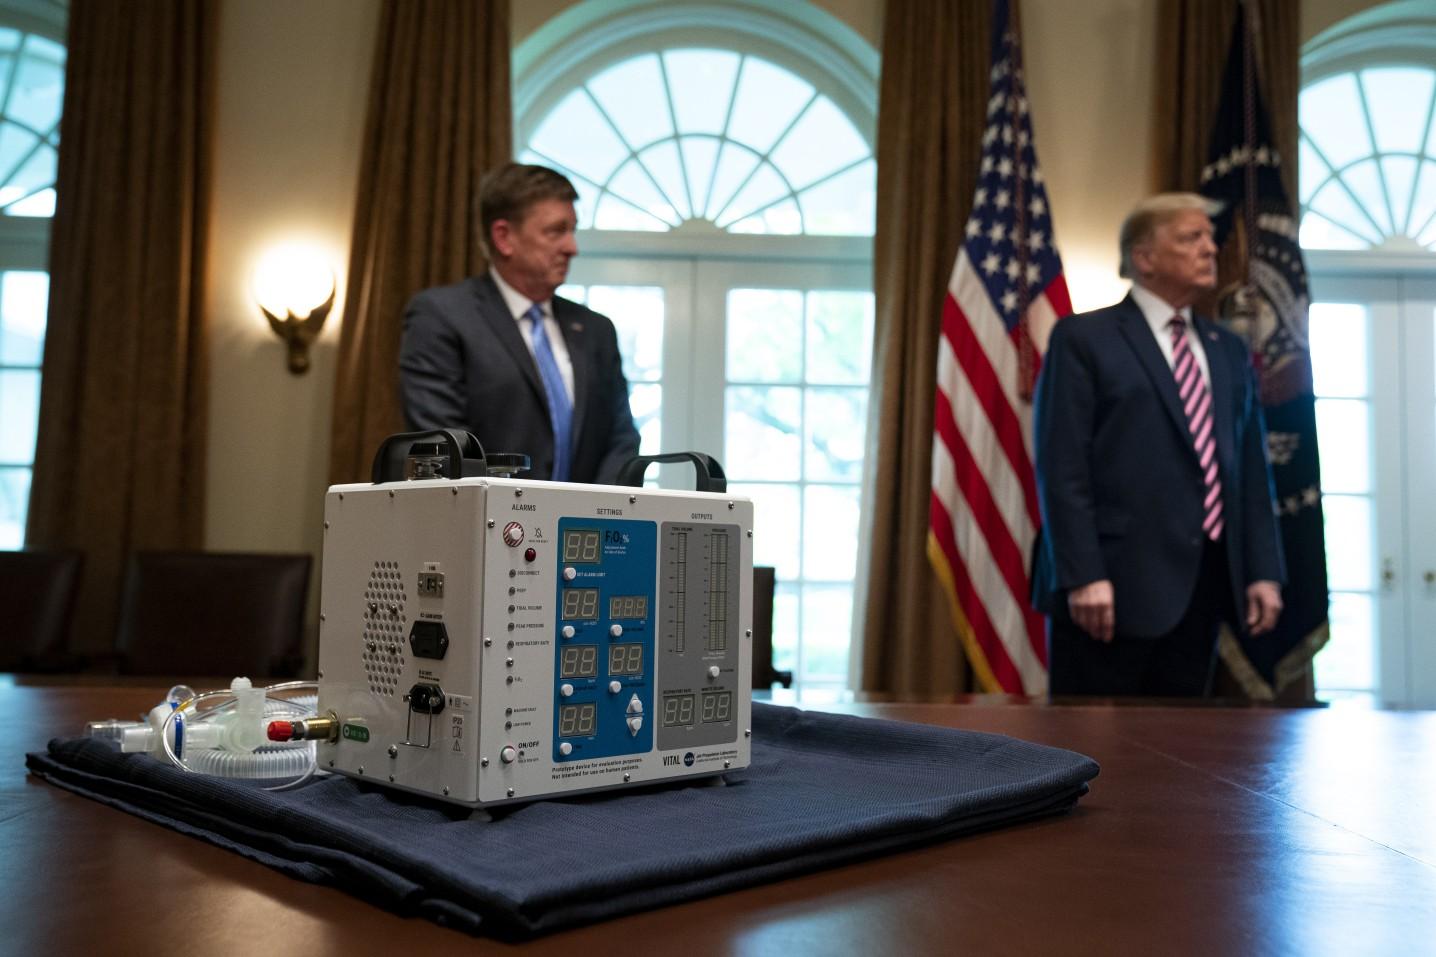 Ventilator, called VITAL, is seen during a Nasa presentation at the White House